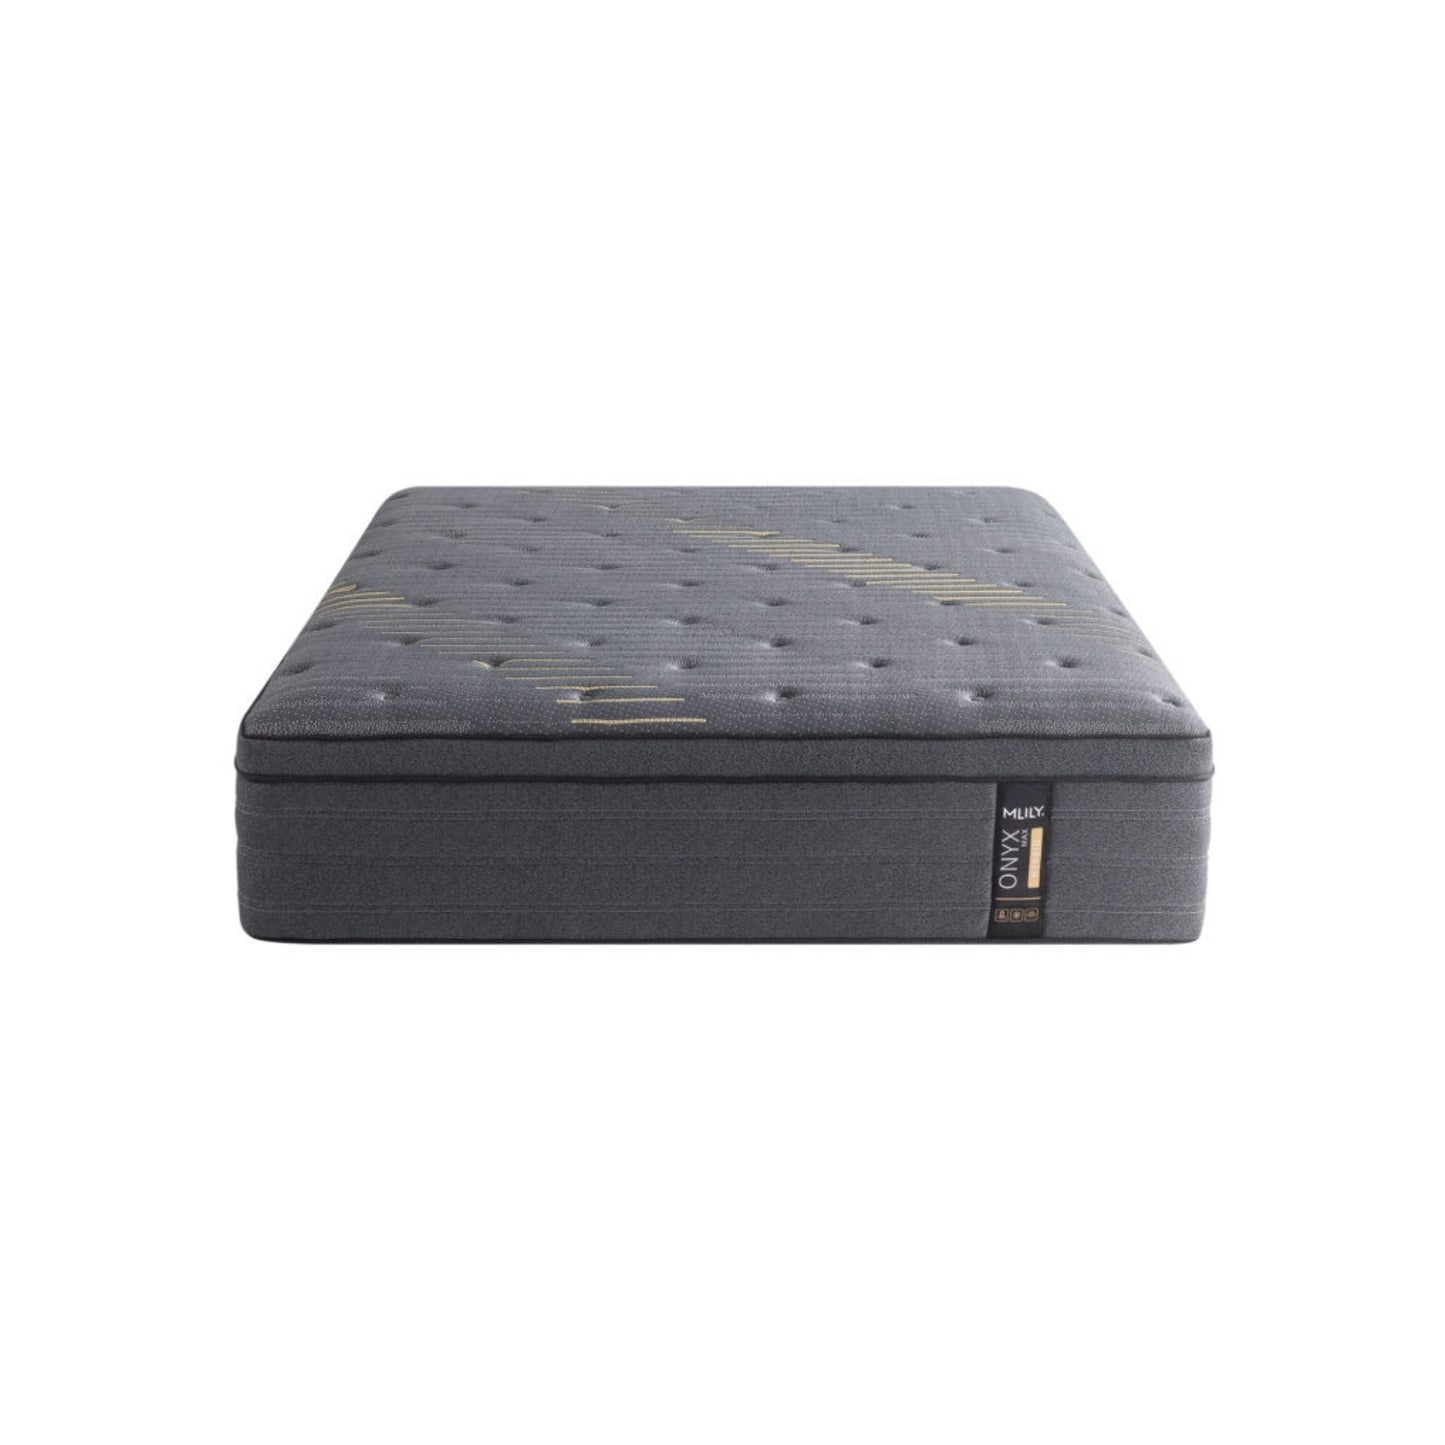 ONYX Max 14" Hybrid Mattress With Copper Infused Memory Foam, Front View